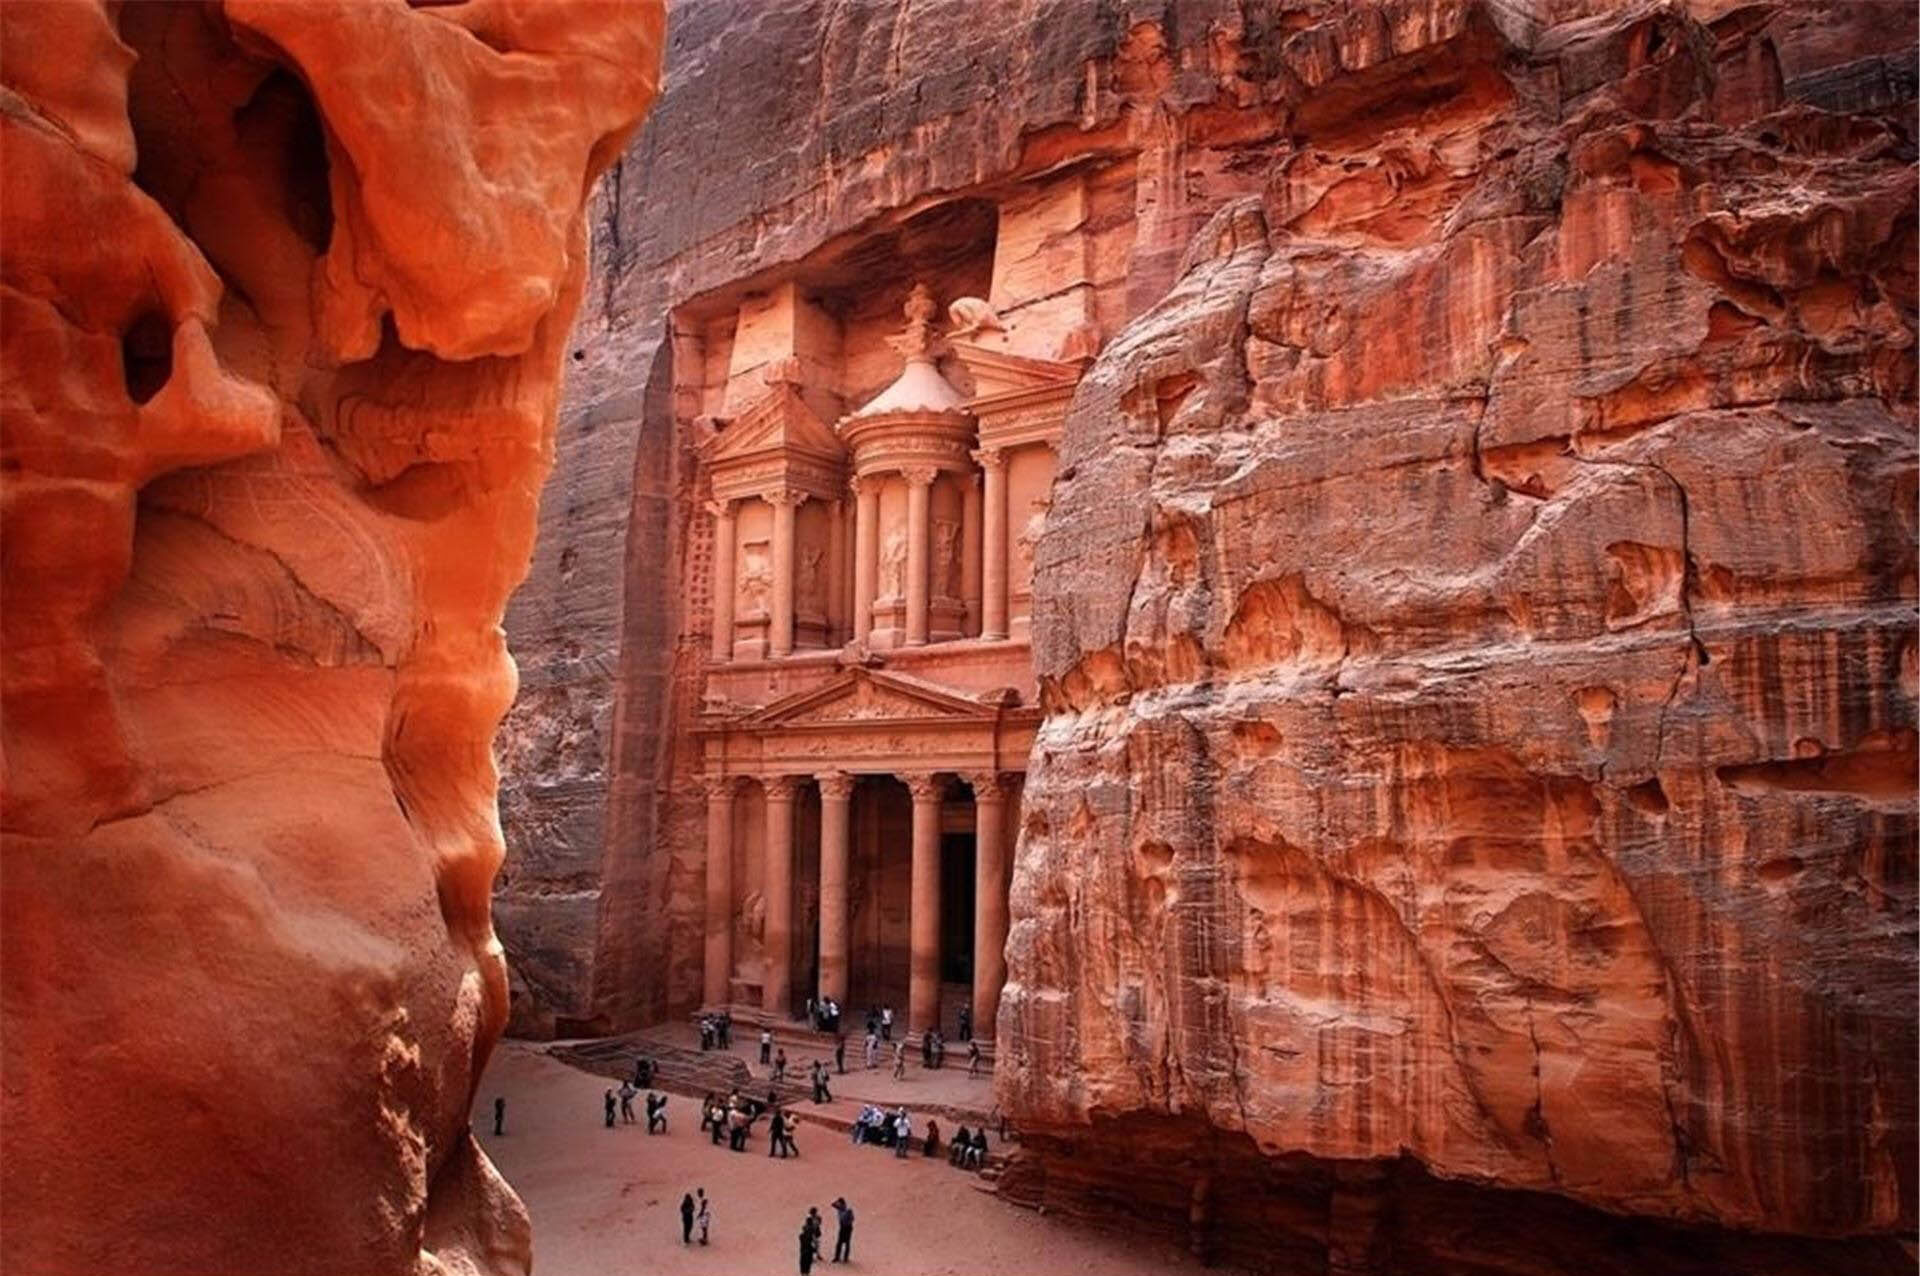 Petra: The Rose-Red City Carved into Rock